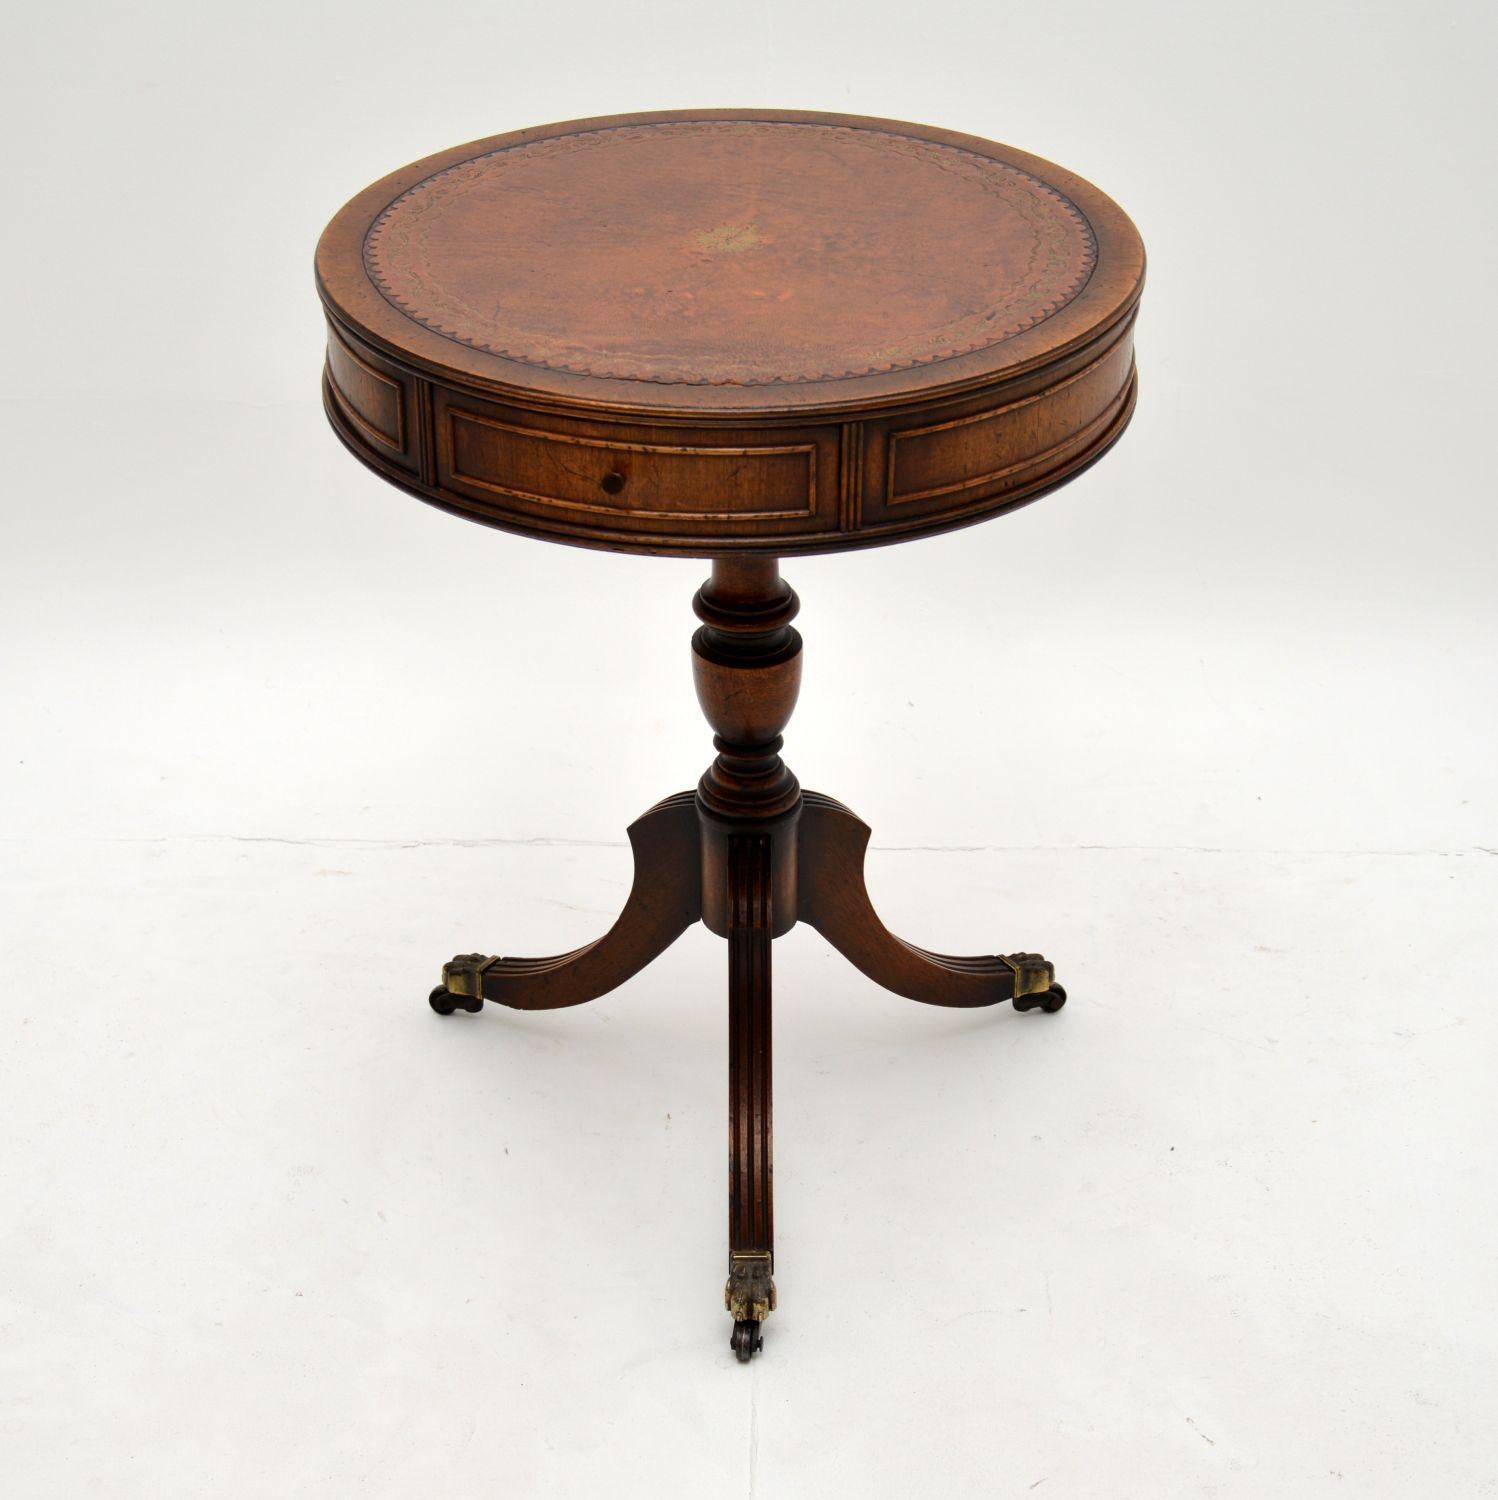 A beautiful drum table in the antique Regency style, which I would date from around the 1930-50’s period.

It is very well made and is a useful size. The brown leather top is beautifully gold tooled, this has brass handles on the two drawers and